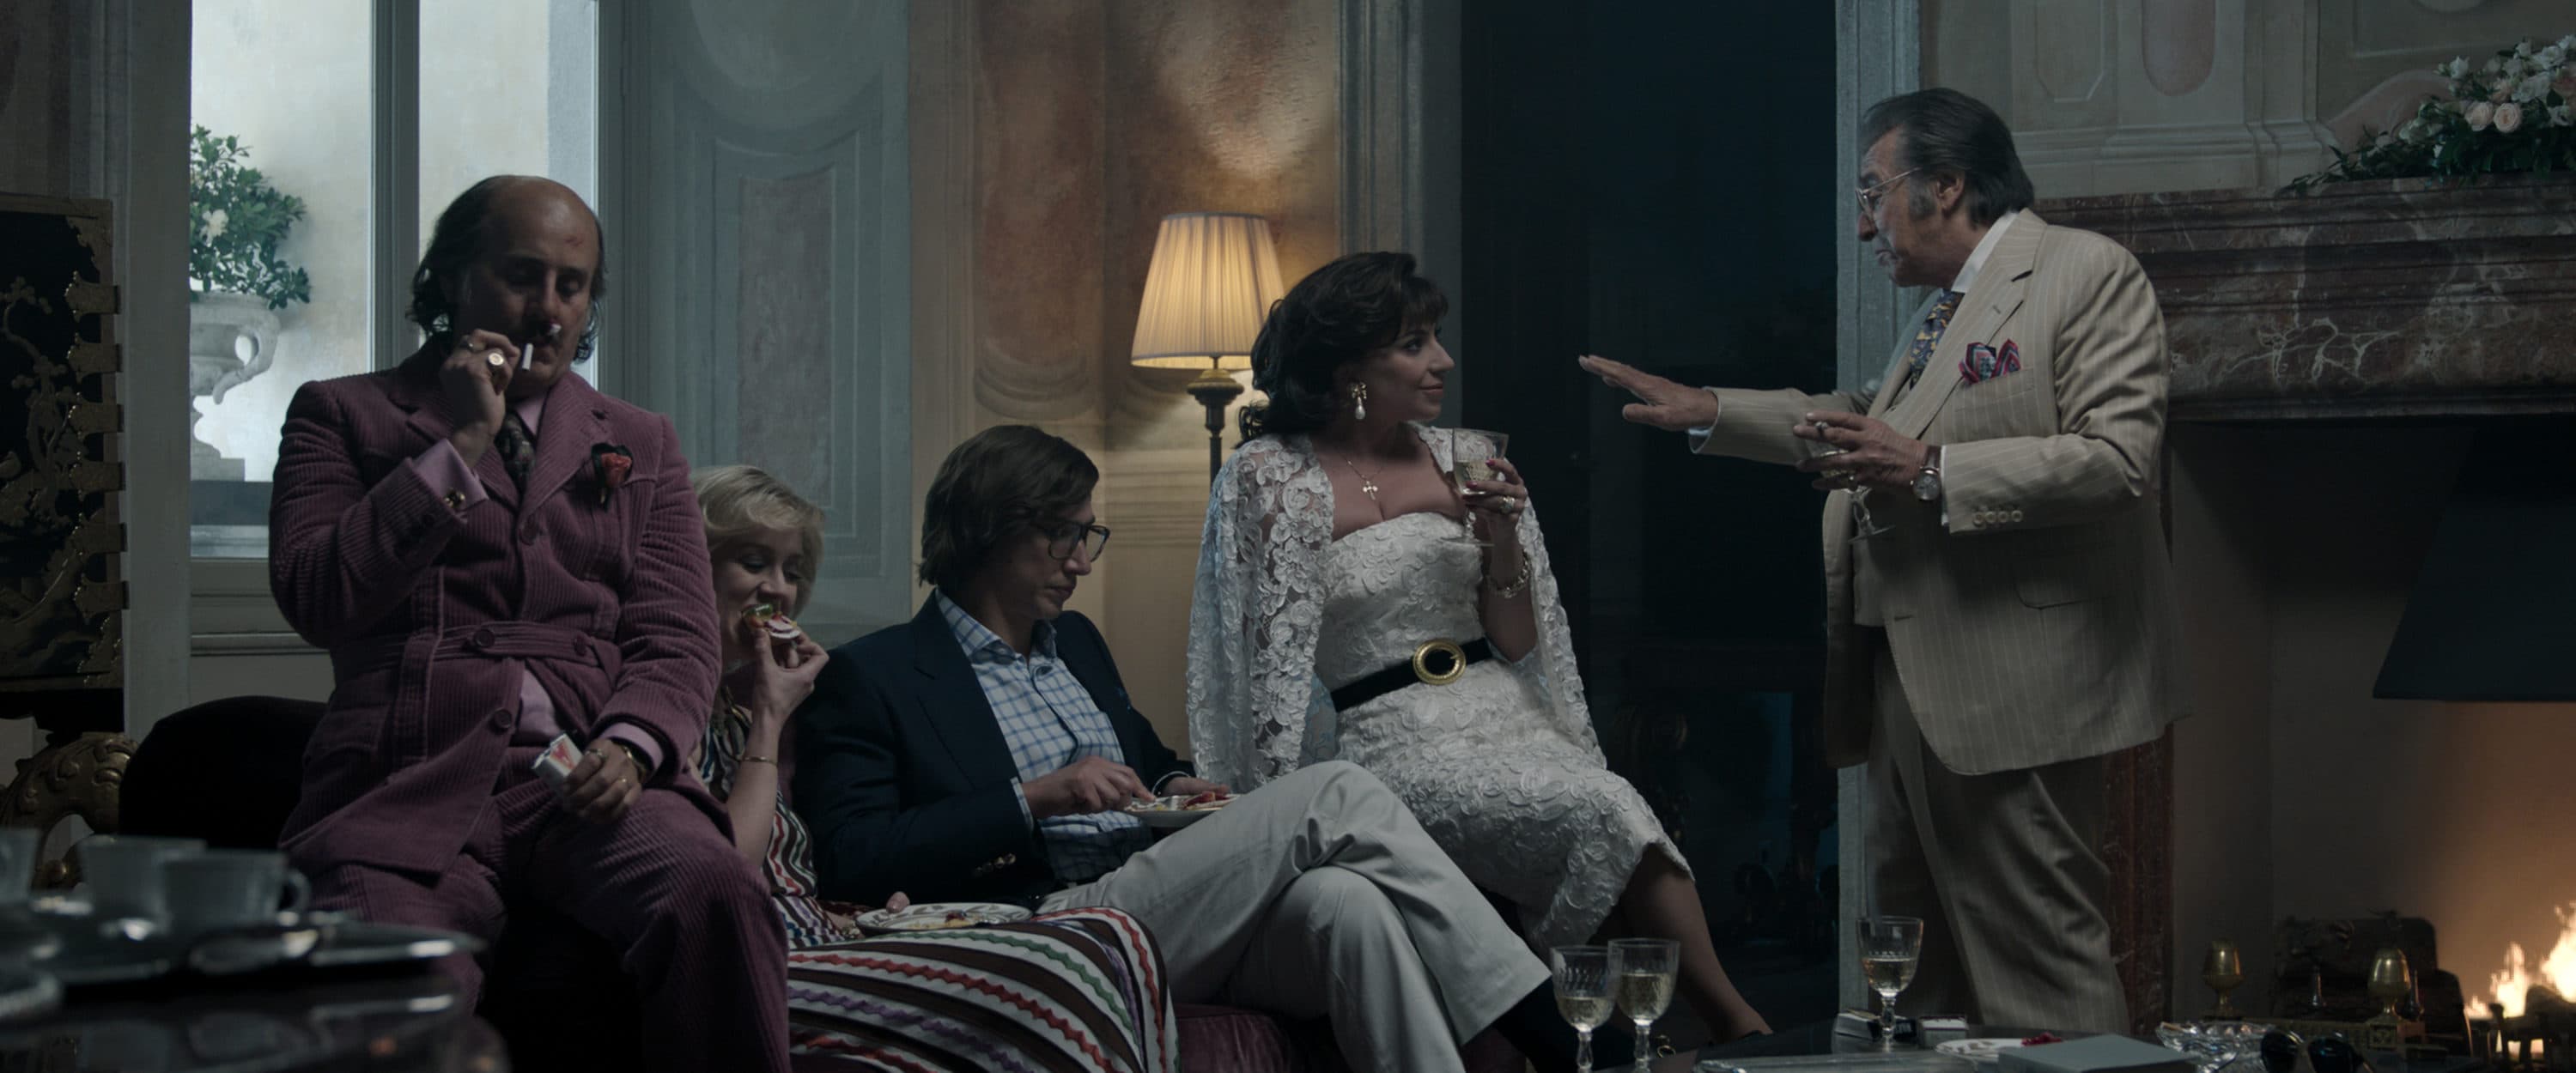 Left to right: Jared Leto as Paolo Gucci, Florence Andrews as Jenny Gucci, Adam Driver as Maurizio Gucci, Lady Gaga as Patrizia Reggiani and Al Pacino as Aldo Gucci in Ridley Scott’s "House of Gucci." (Courtesy Metro Goldwyn Mayer Pictures Inc.)